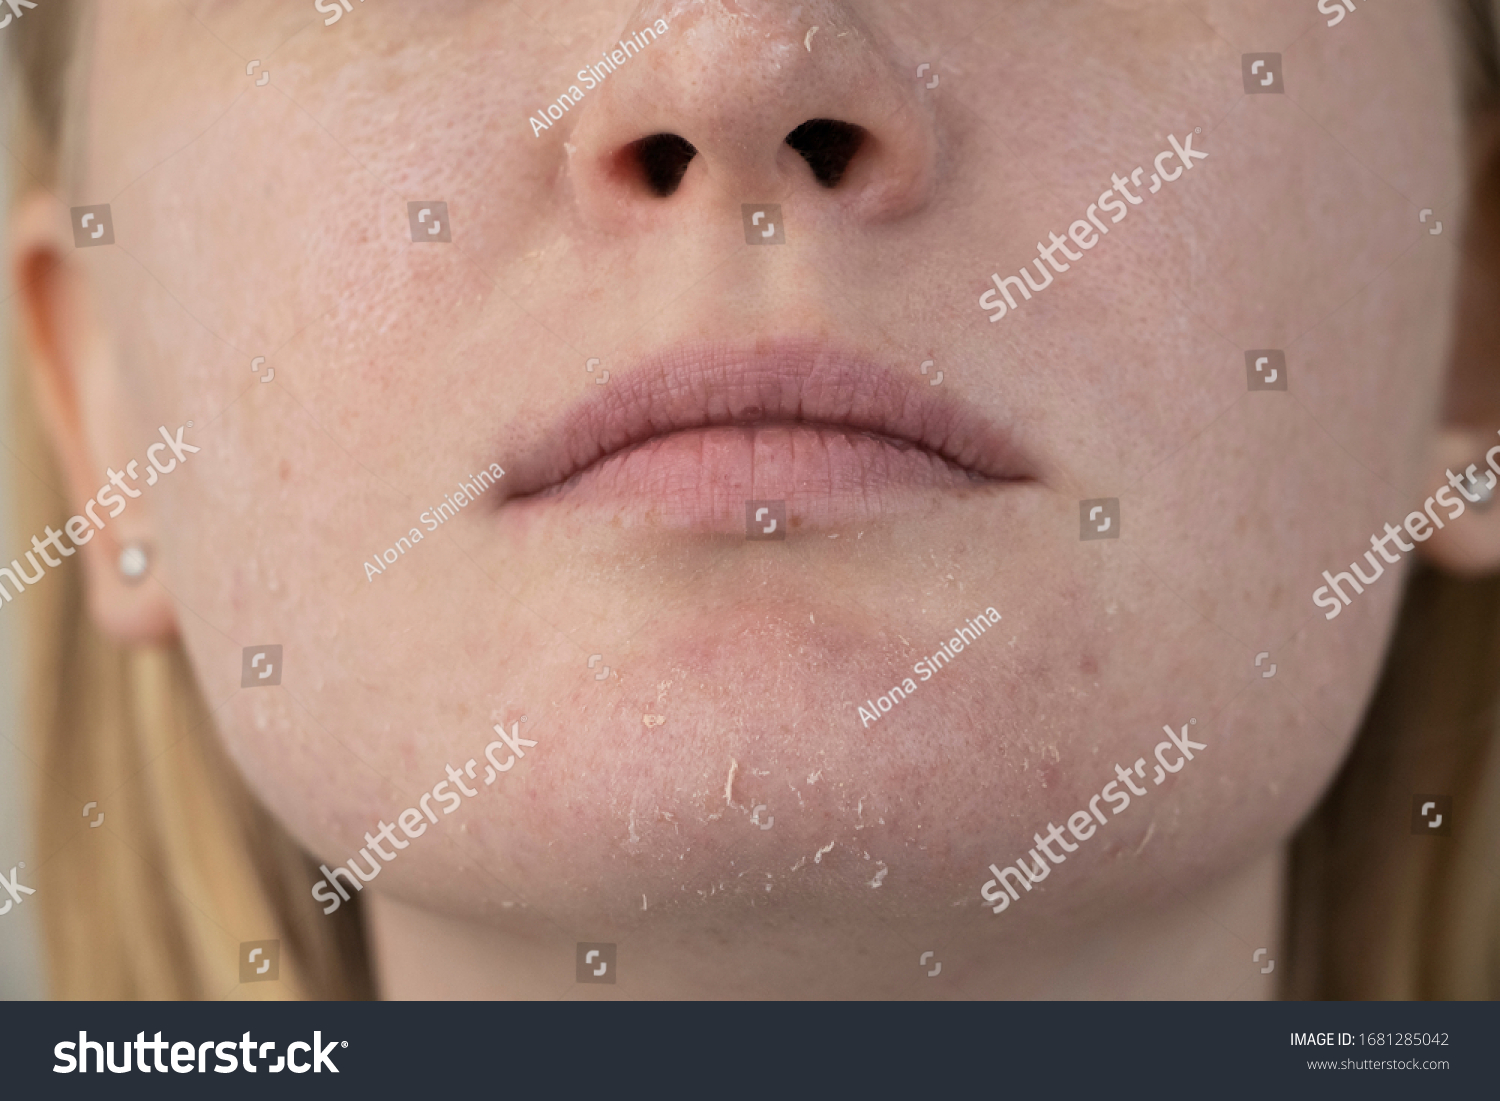 A woman examines dry skin on her face. Peeling, coarsening, discomfort, skin sensitivity. Patient at the appointment of a dermatologist or cosmetologist, selection of cream for dryness #1681285042